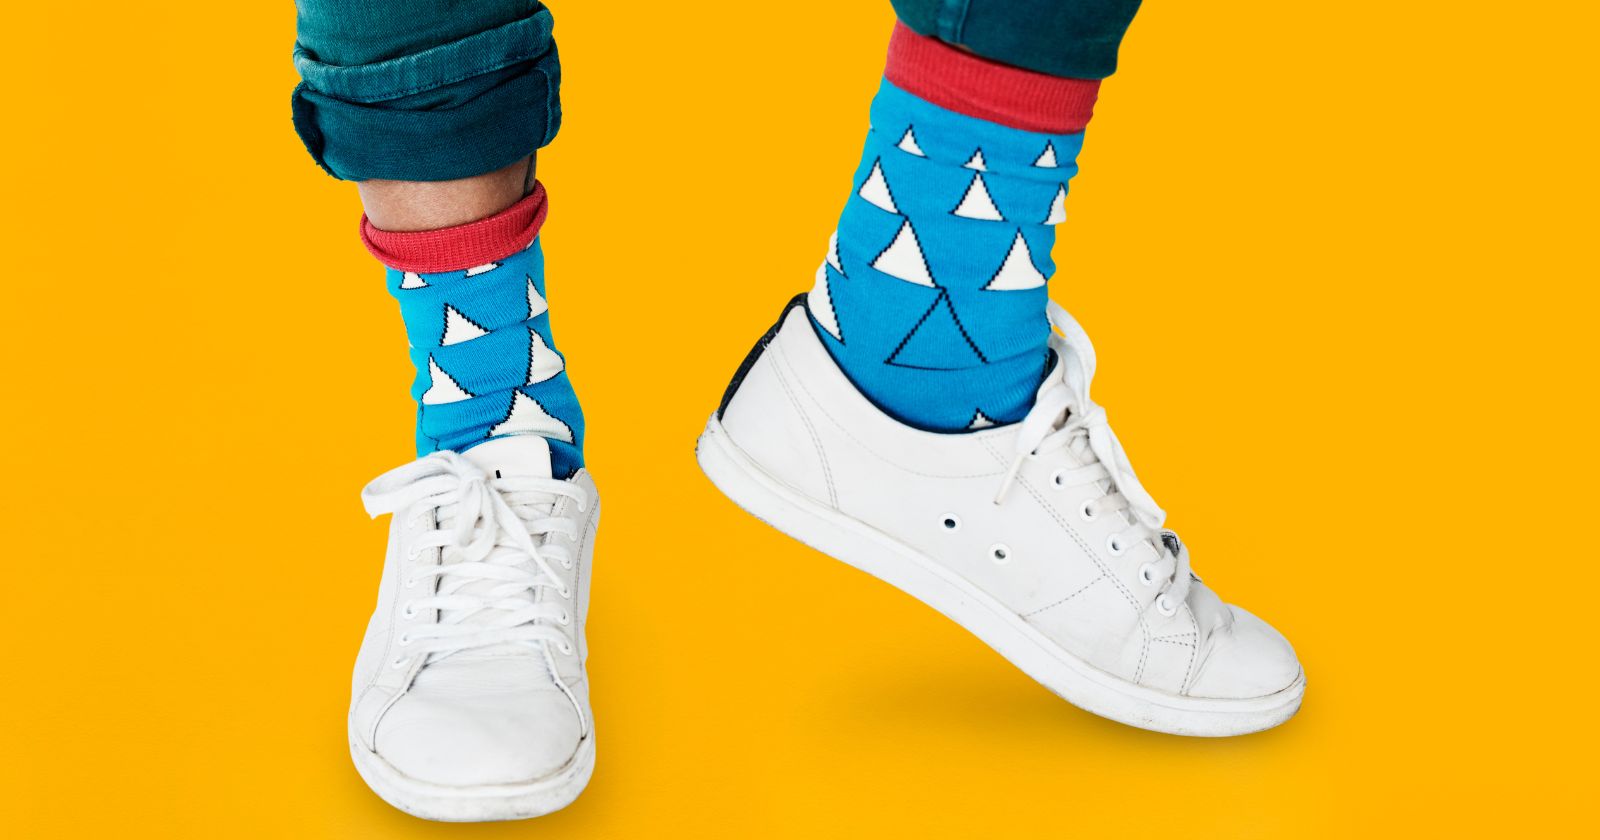 Socks To Wear With Sneakers Featured